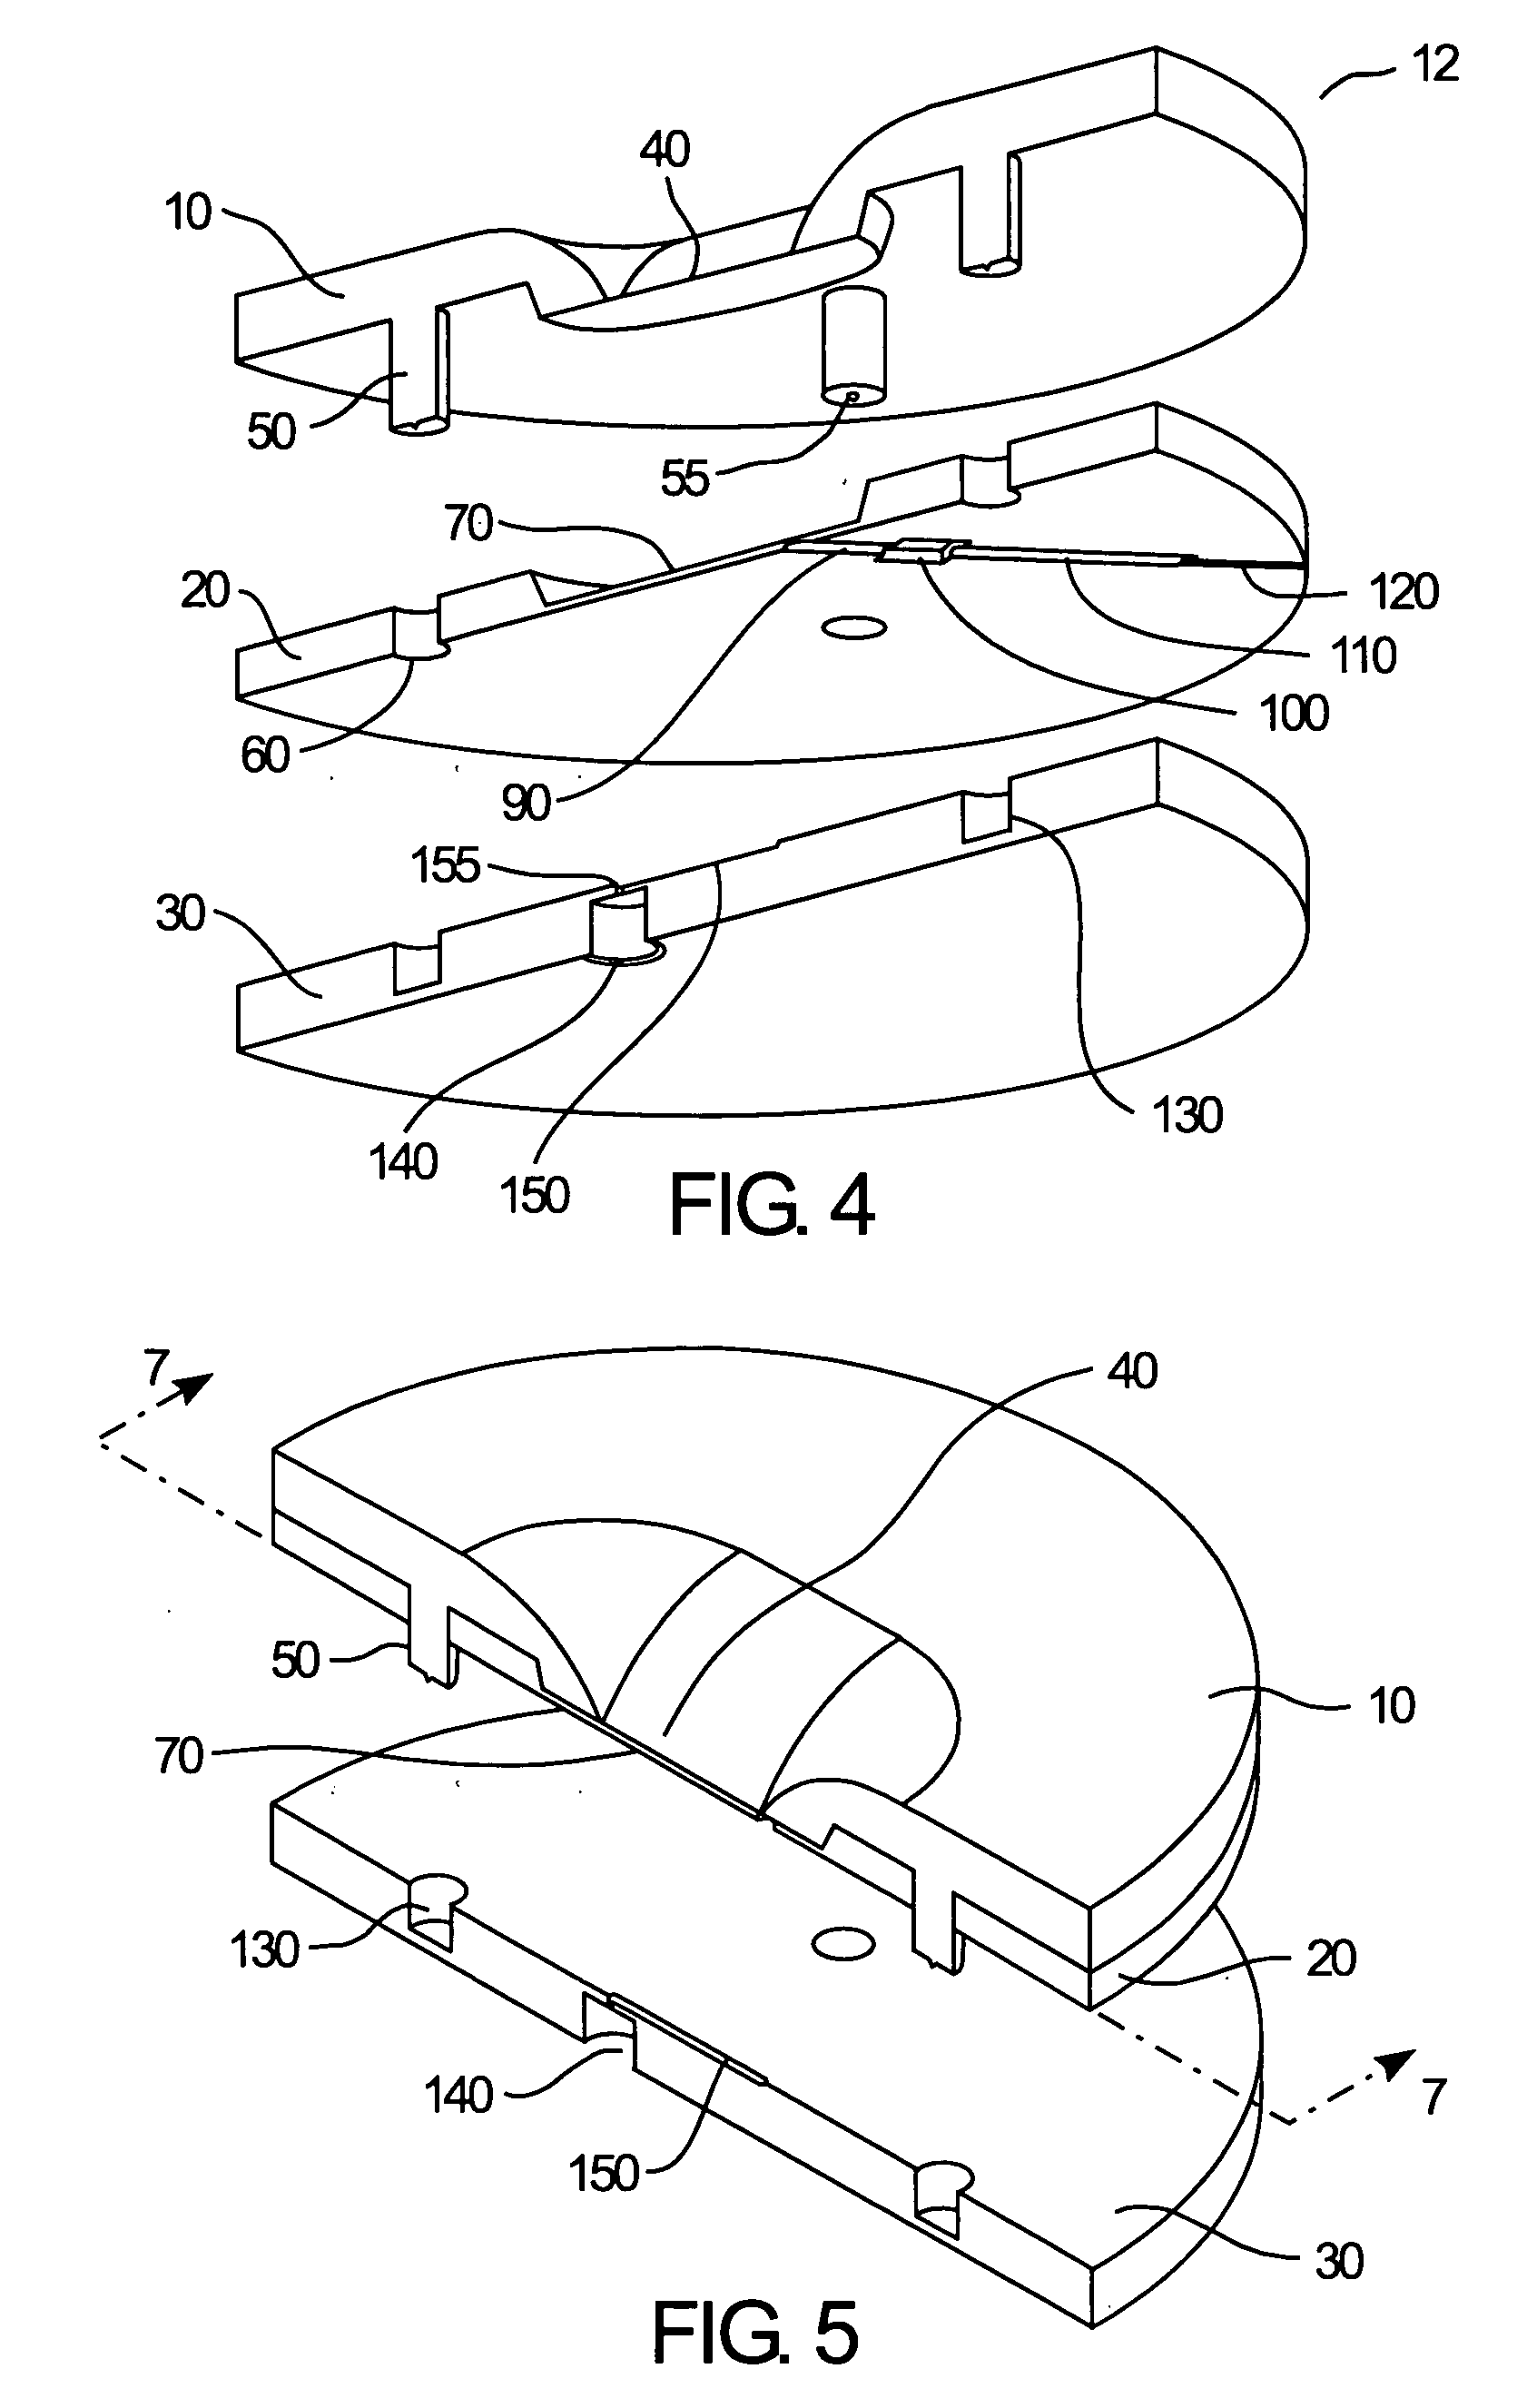 Fluid handling devices